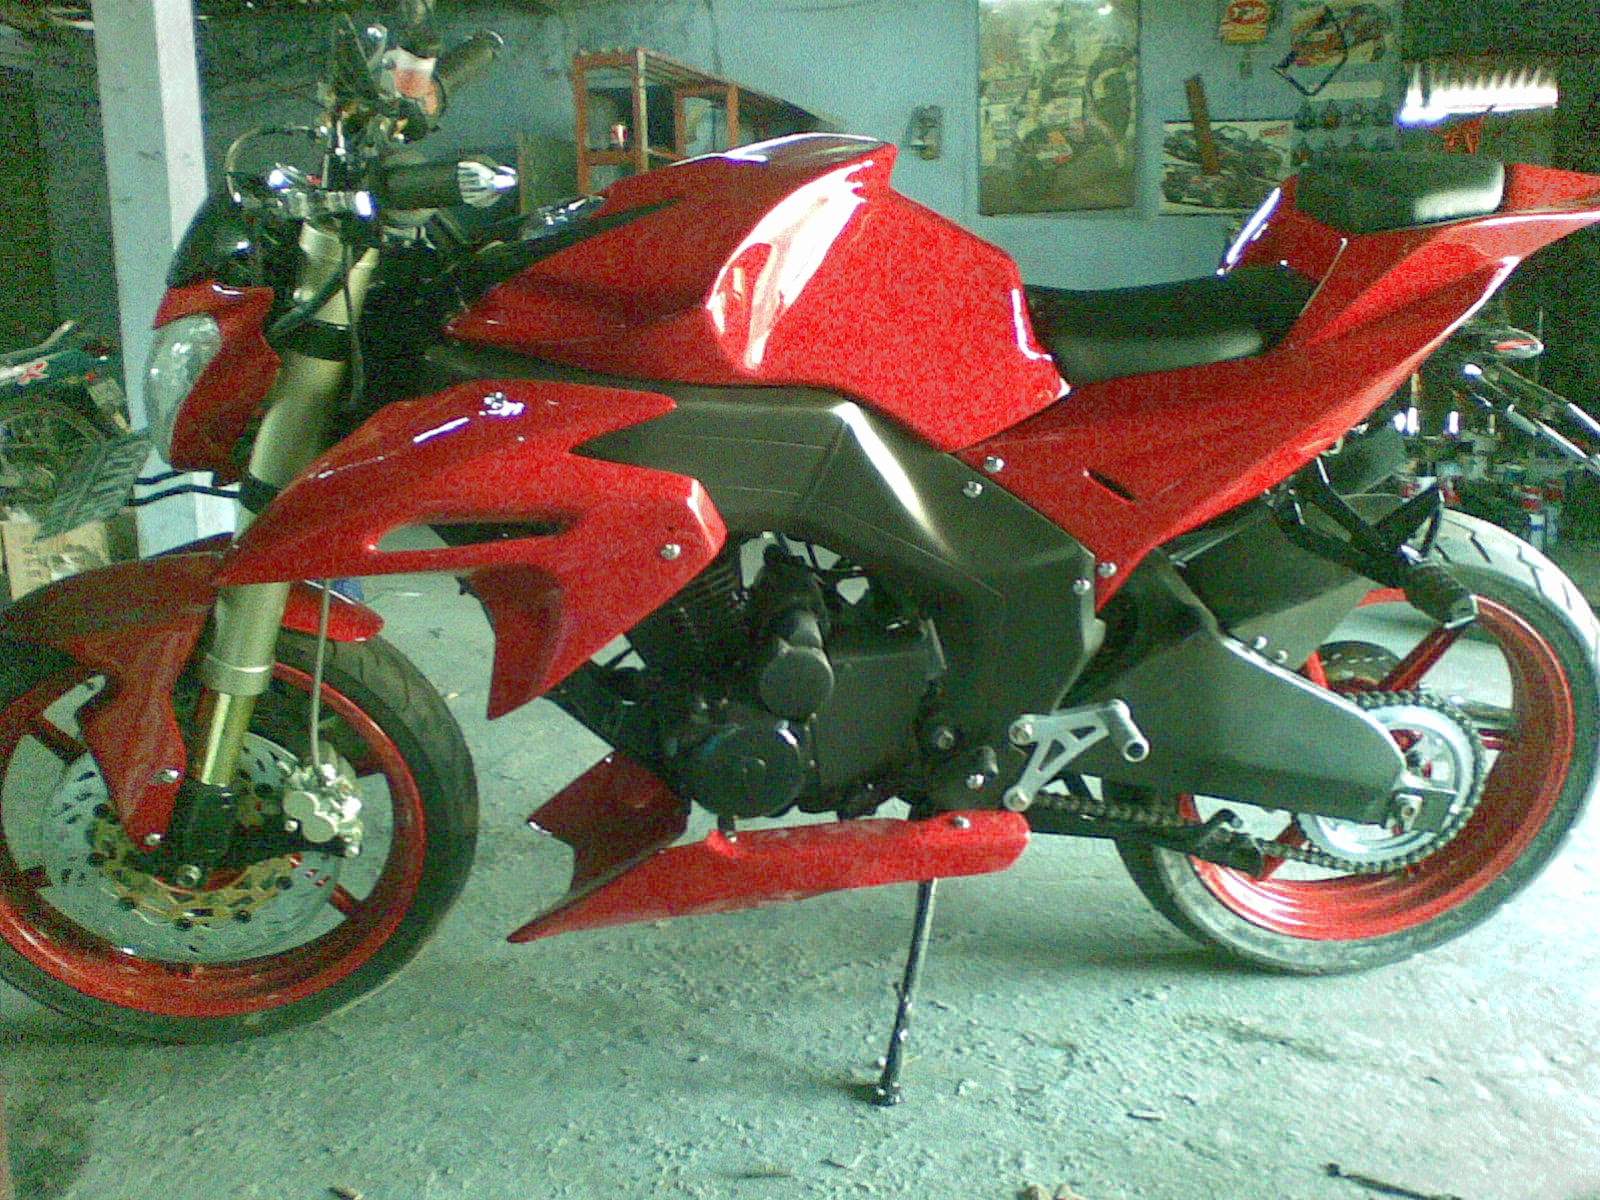 AND MODIFIKASI SYNDICATE HONDA TIGER STREET FIGHTER BY AND